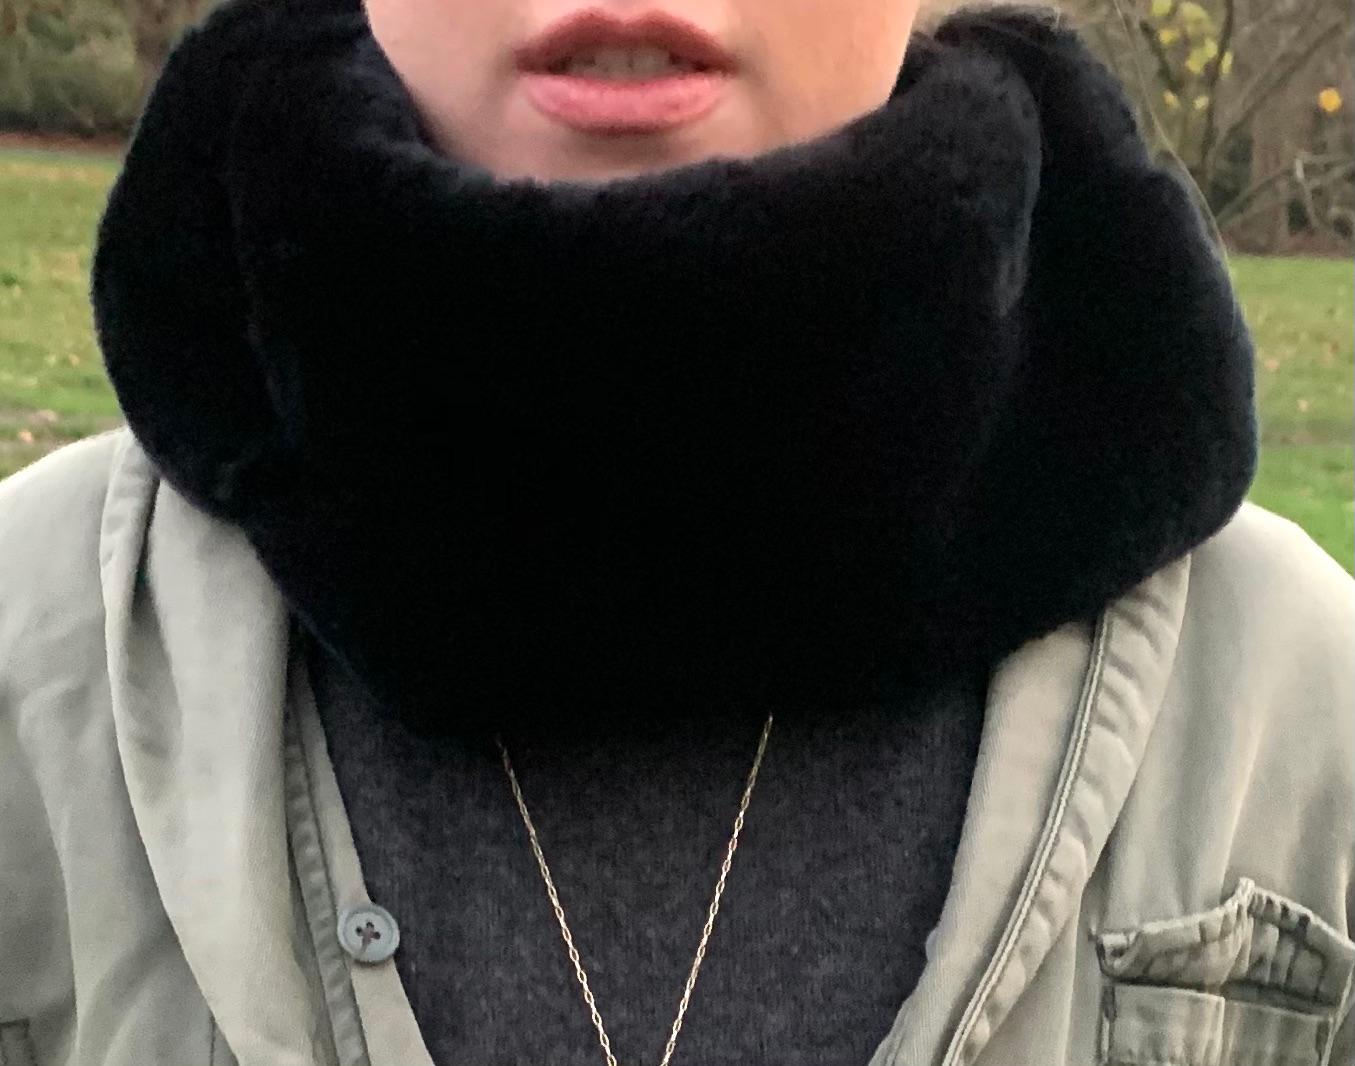 Verheyen London in Black Rex Rabbit Fur Collar - 3 ways 

The cross-over versatile design can be worn from day to night. Handcrafted in London in the finest dyed black rex rabbit fur  A design that can be worn in 3 ways and the perfect items for